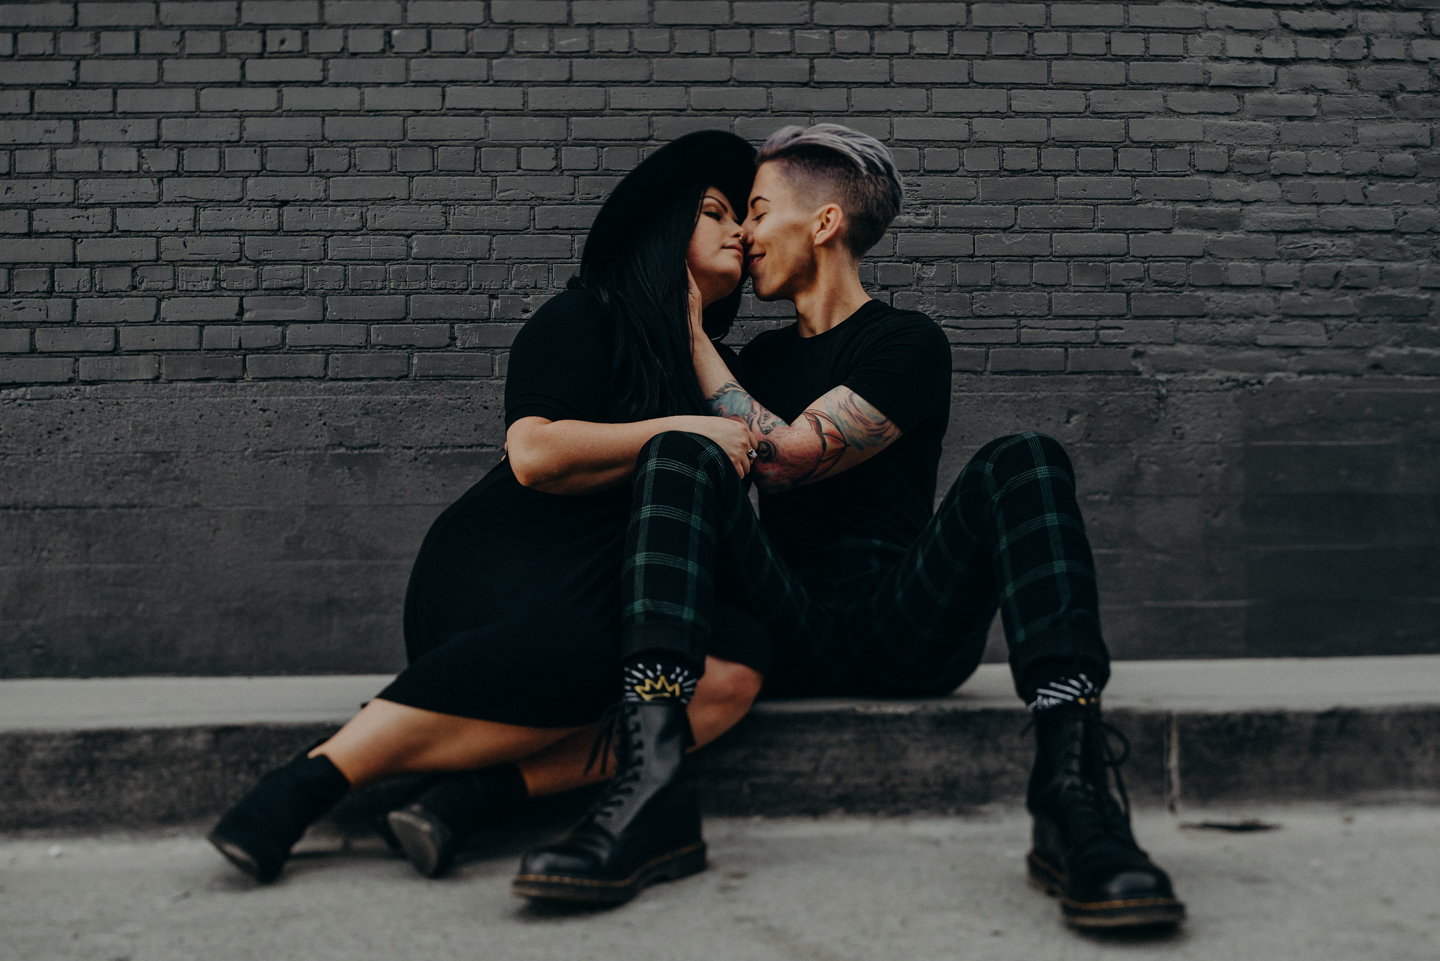 queer wedding photographer in los angeles - lesbian engagement session los angeles - isaiahandtaylor.com-030.jpg